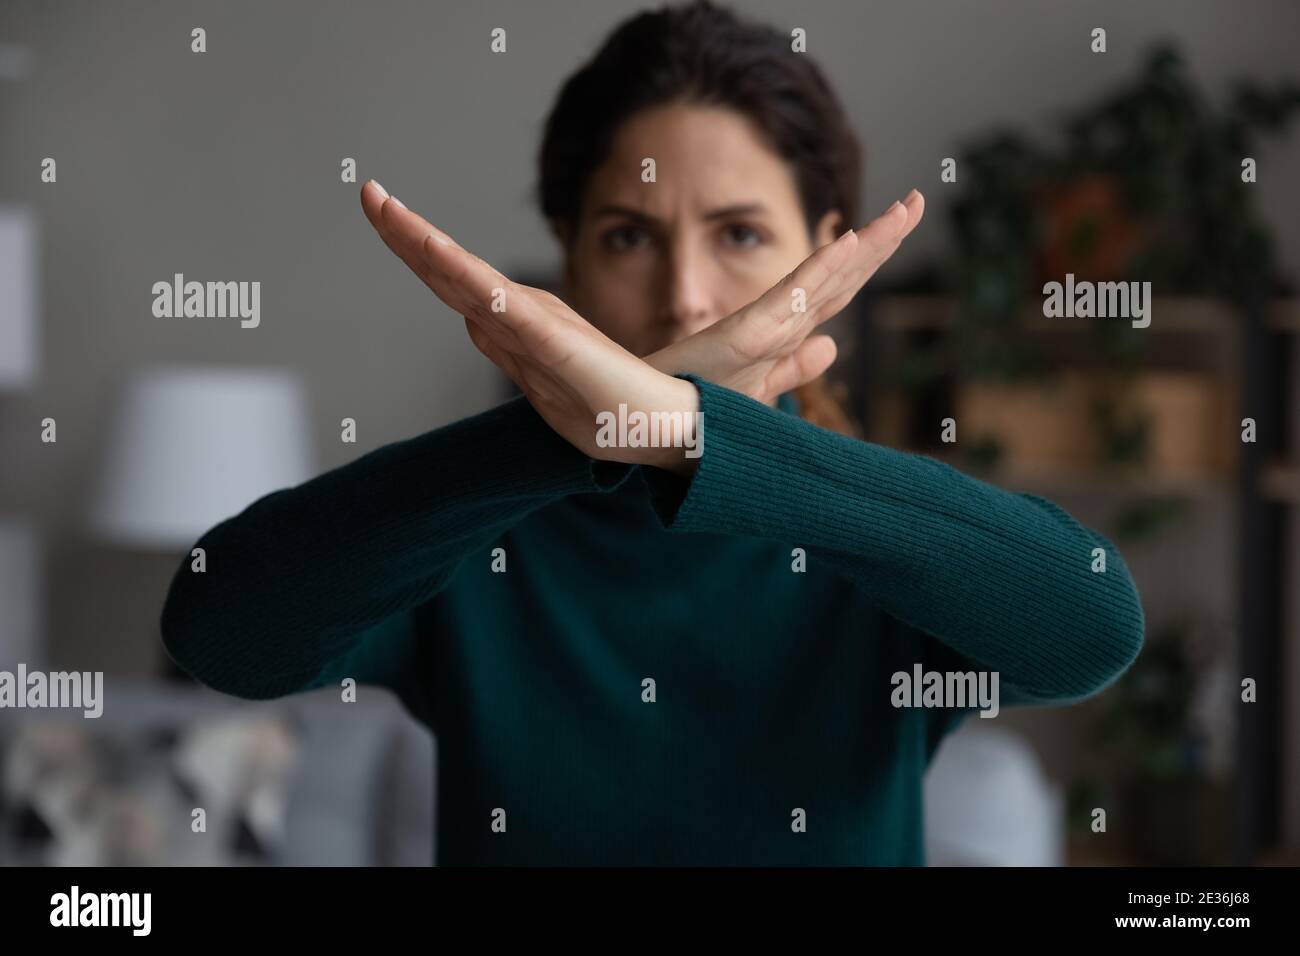 Determined young woman show no hand gesture Stock Photo